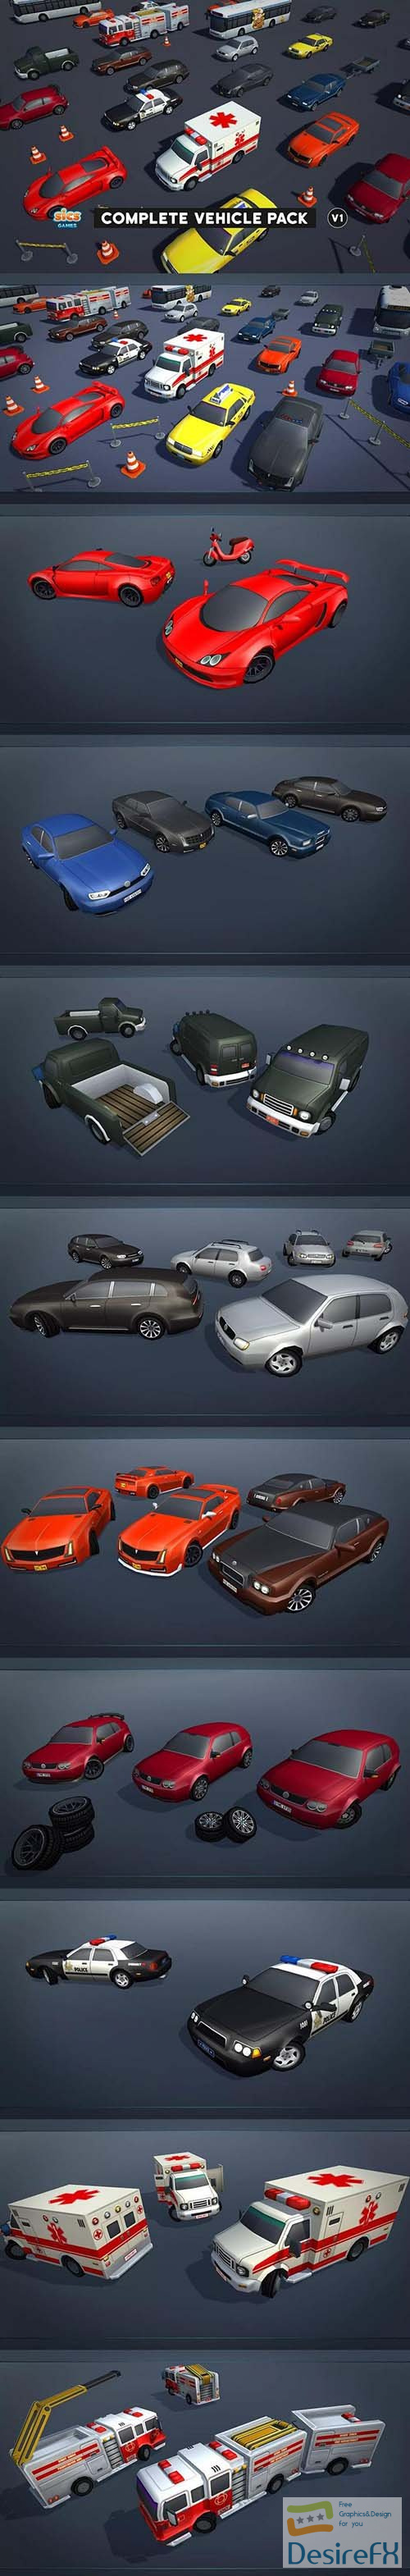 Pack of low-poly vehicles - 3d model